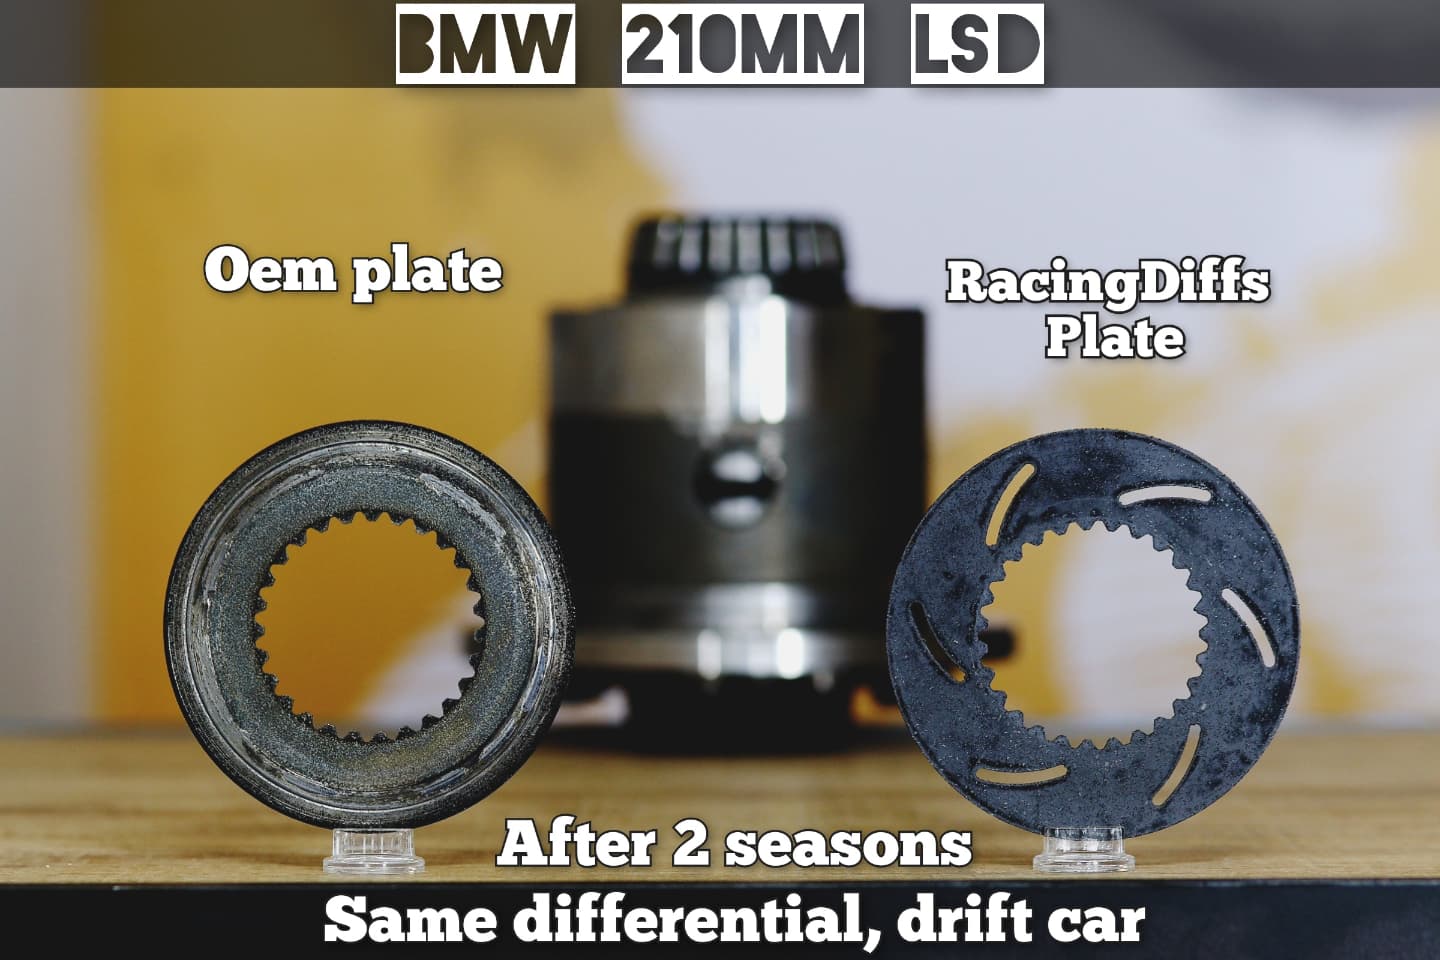 We compared OEM plates with RacingDiffs. Results are surprising!